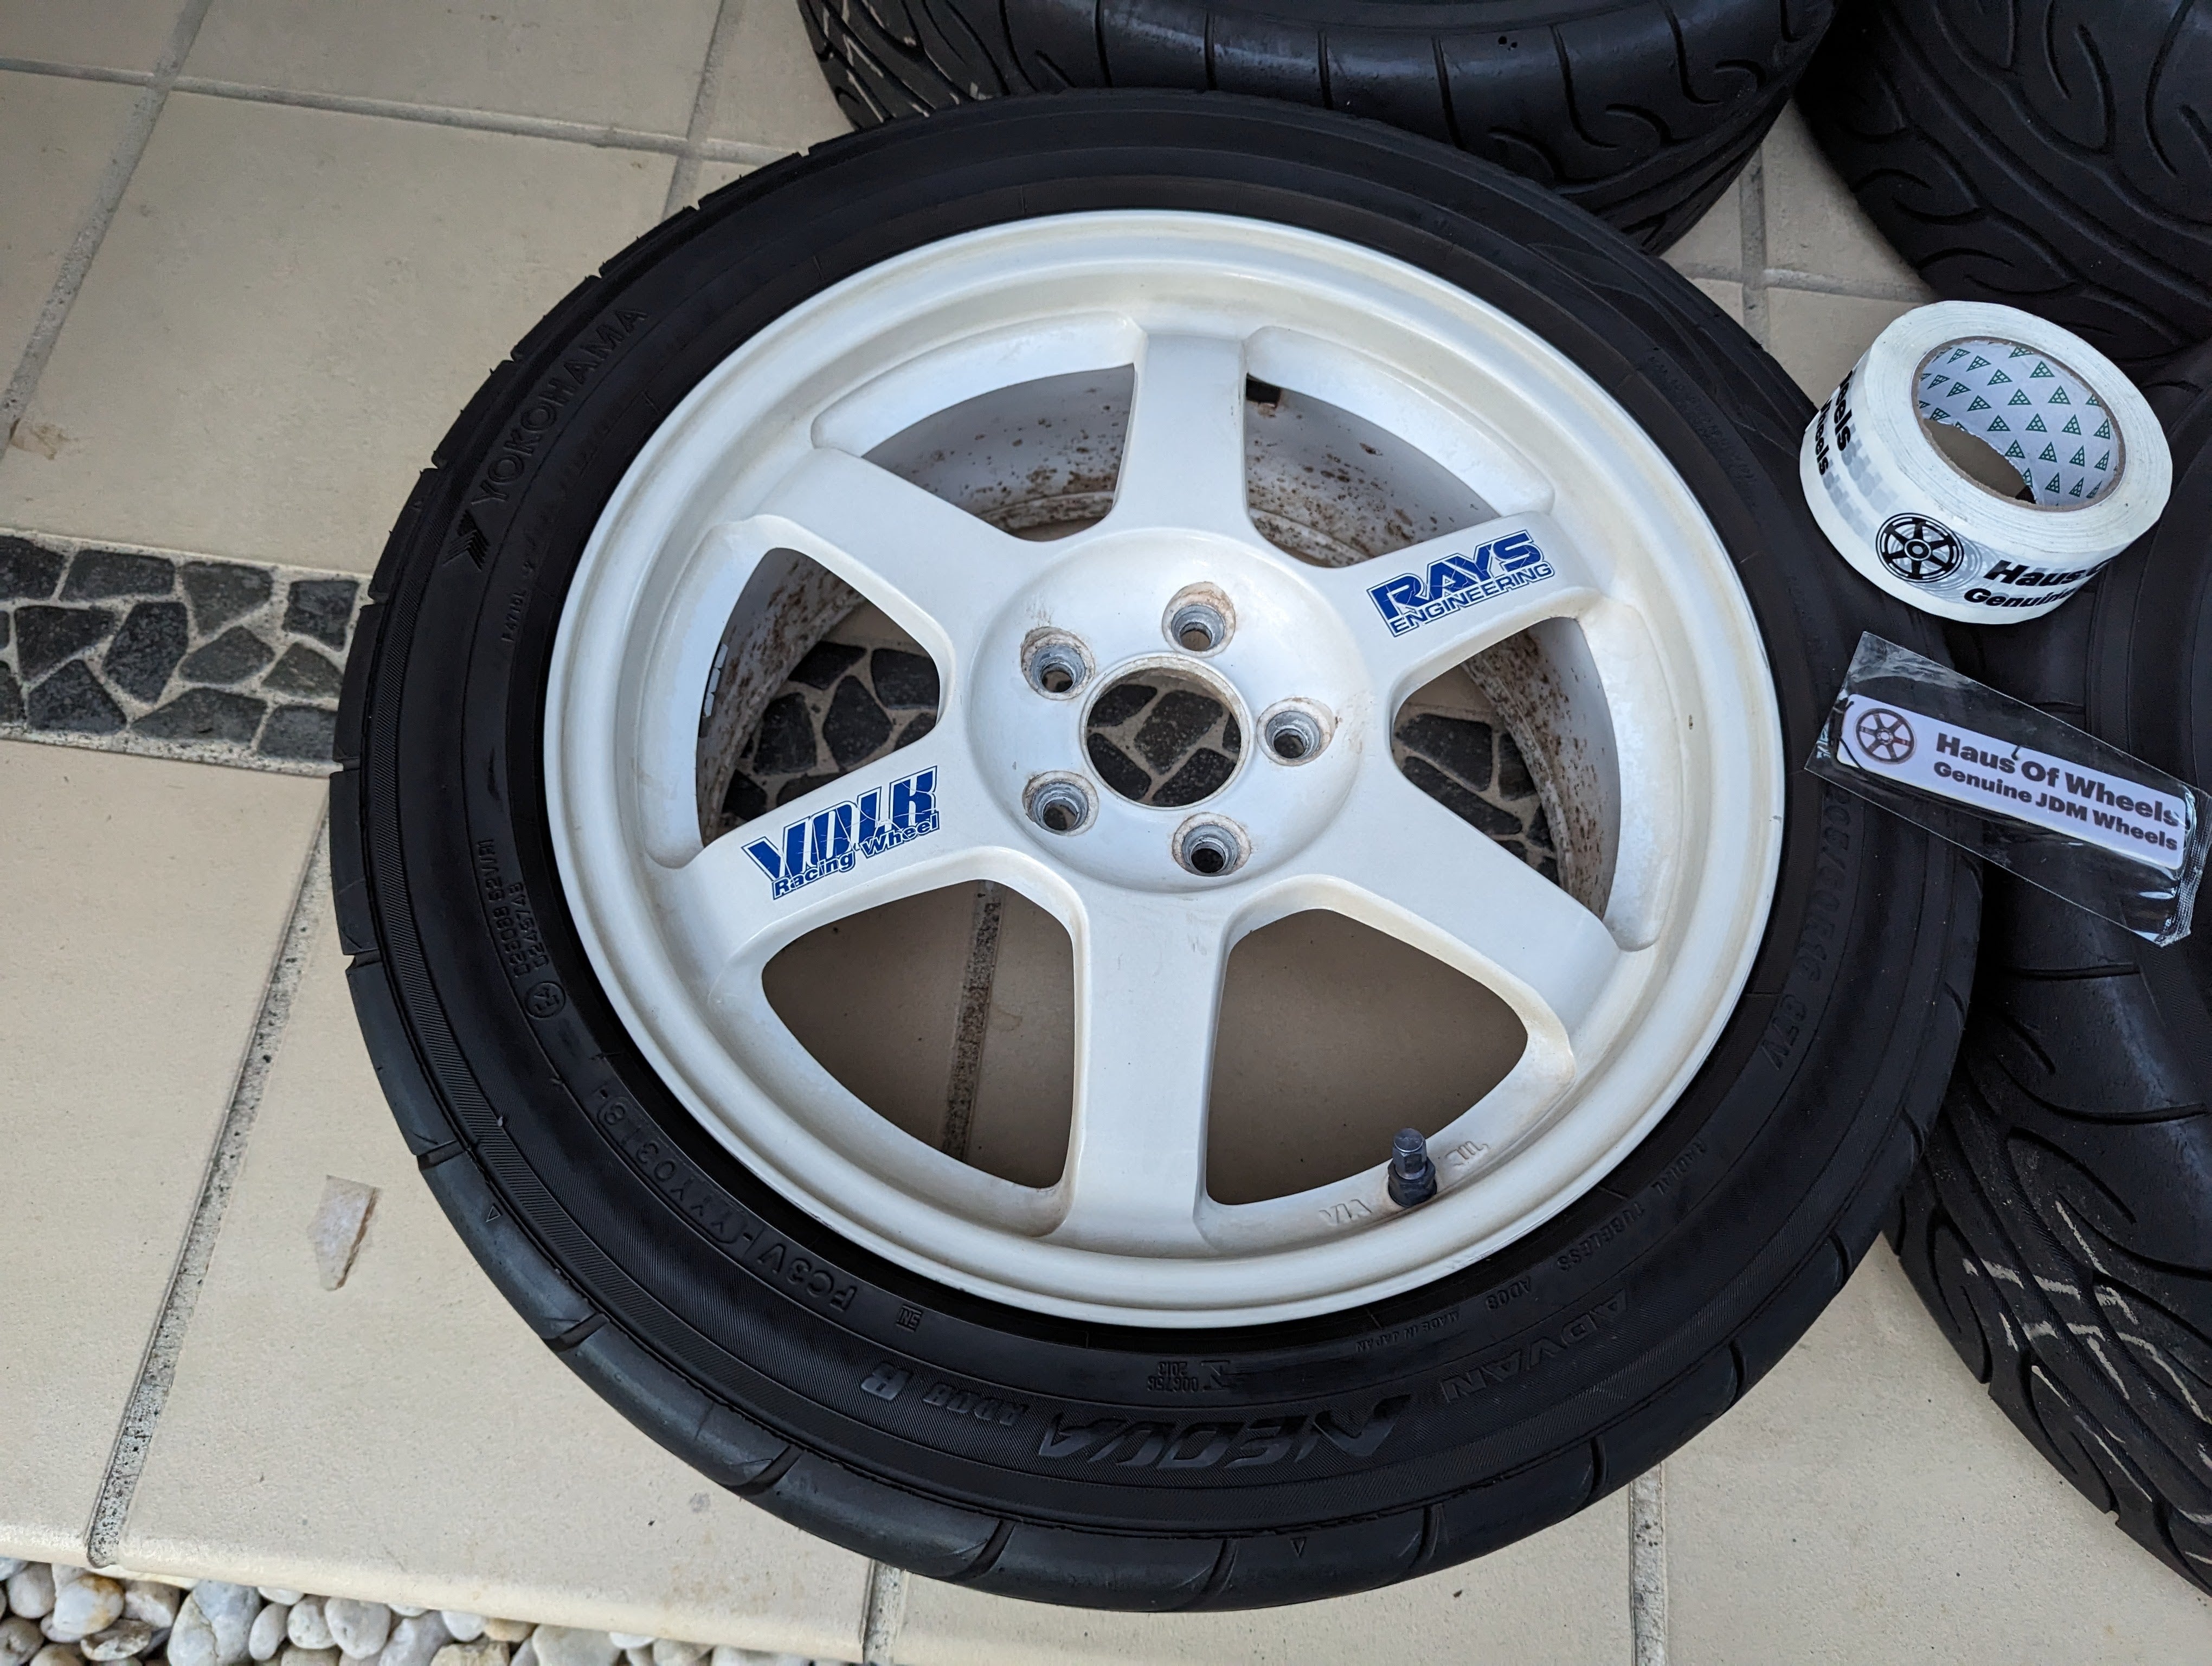 Rays TE37 OG (White) with Genuine Rays Stickers and AD08R Tyres